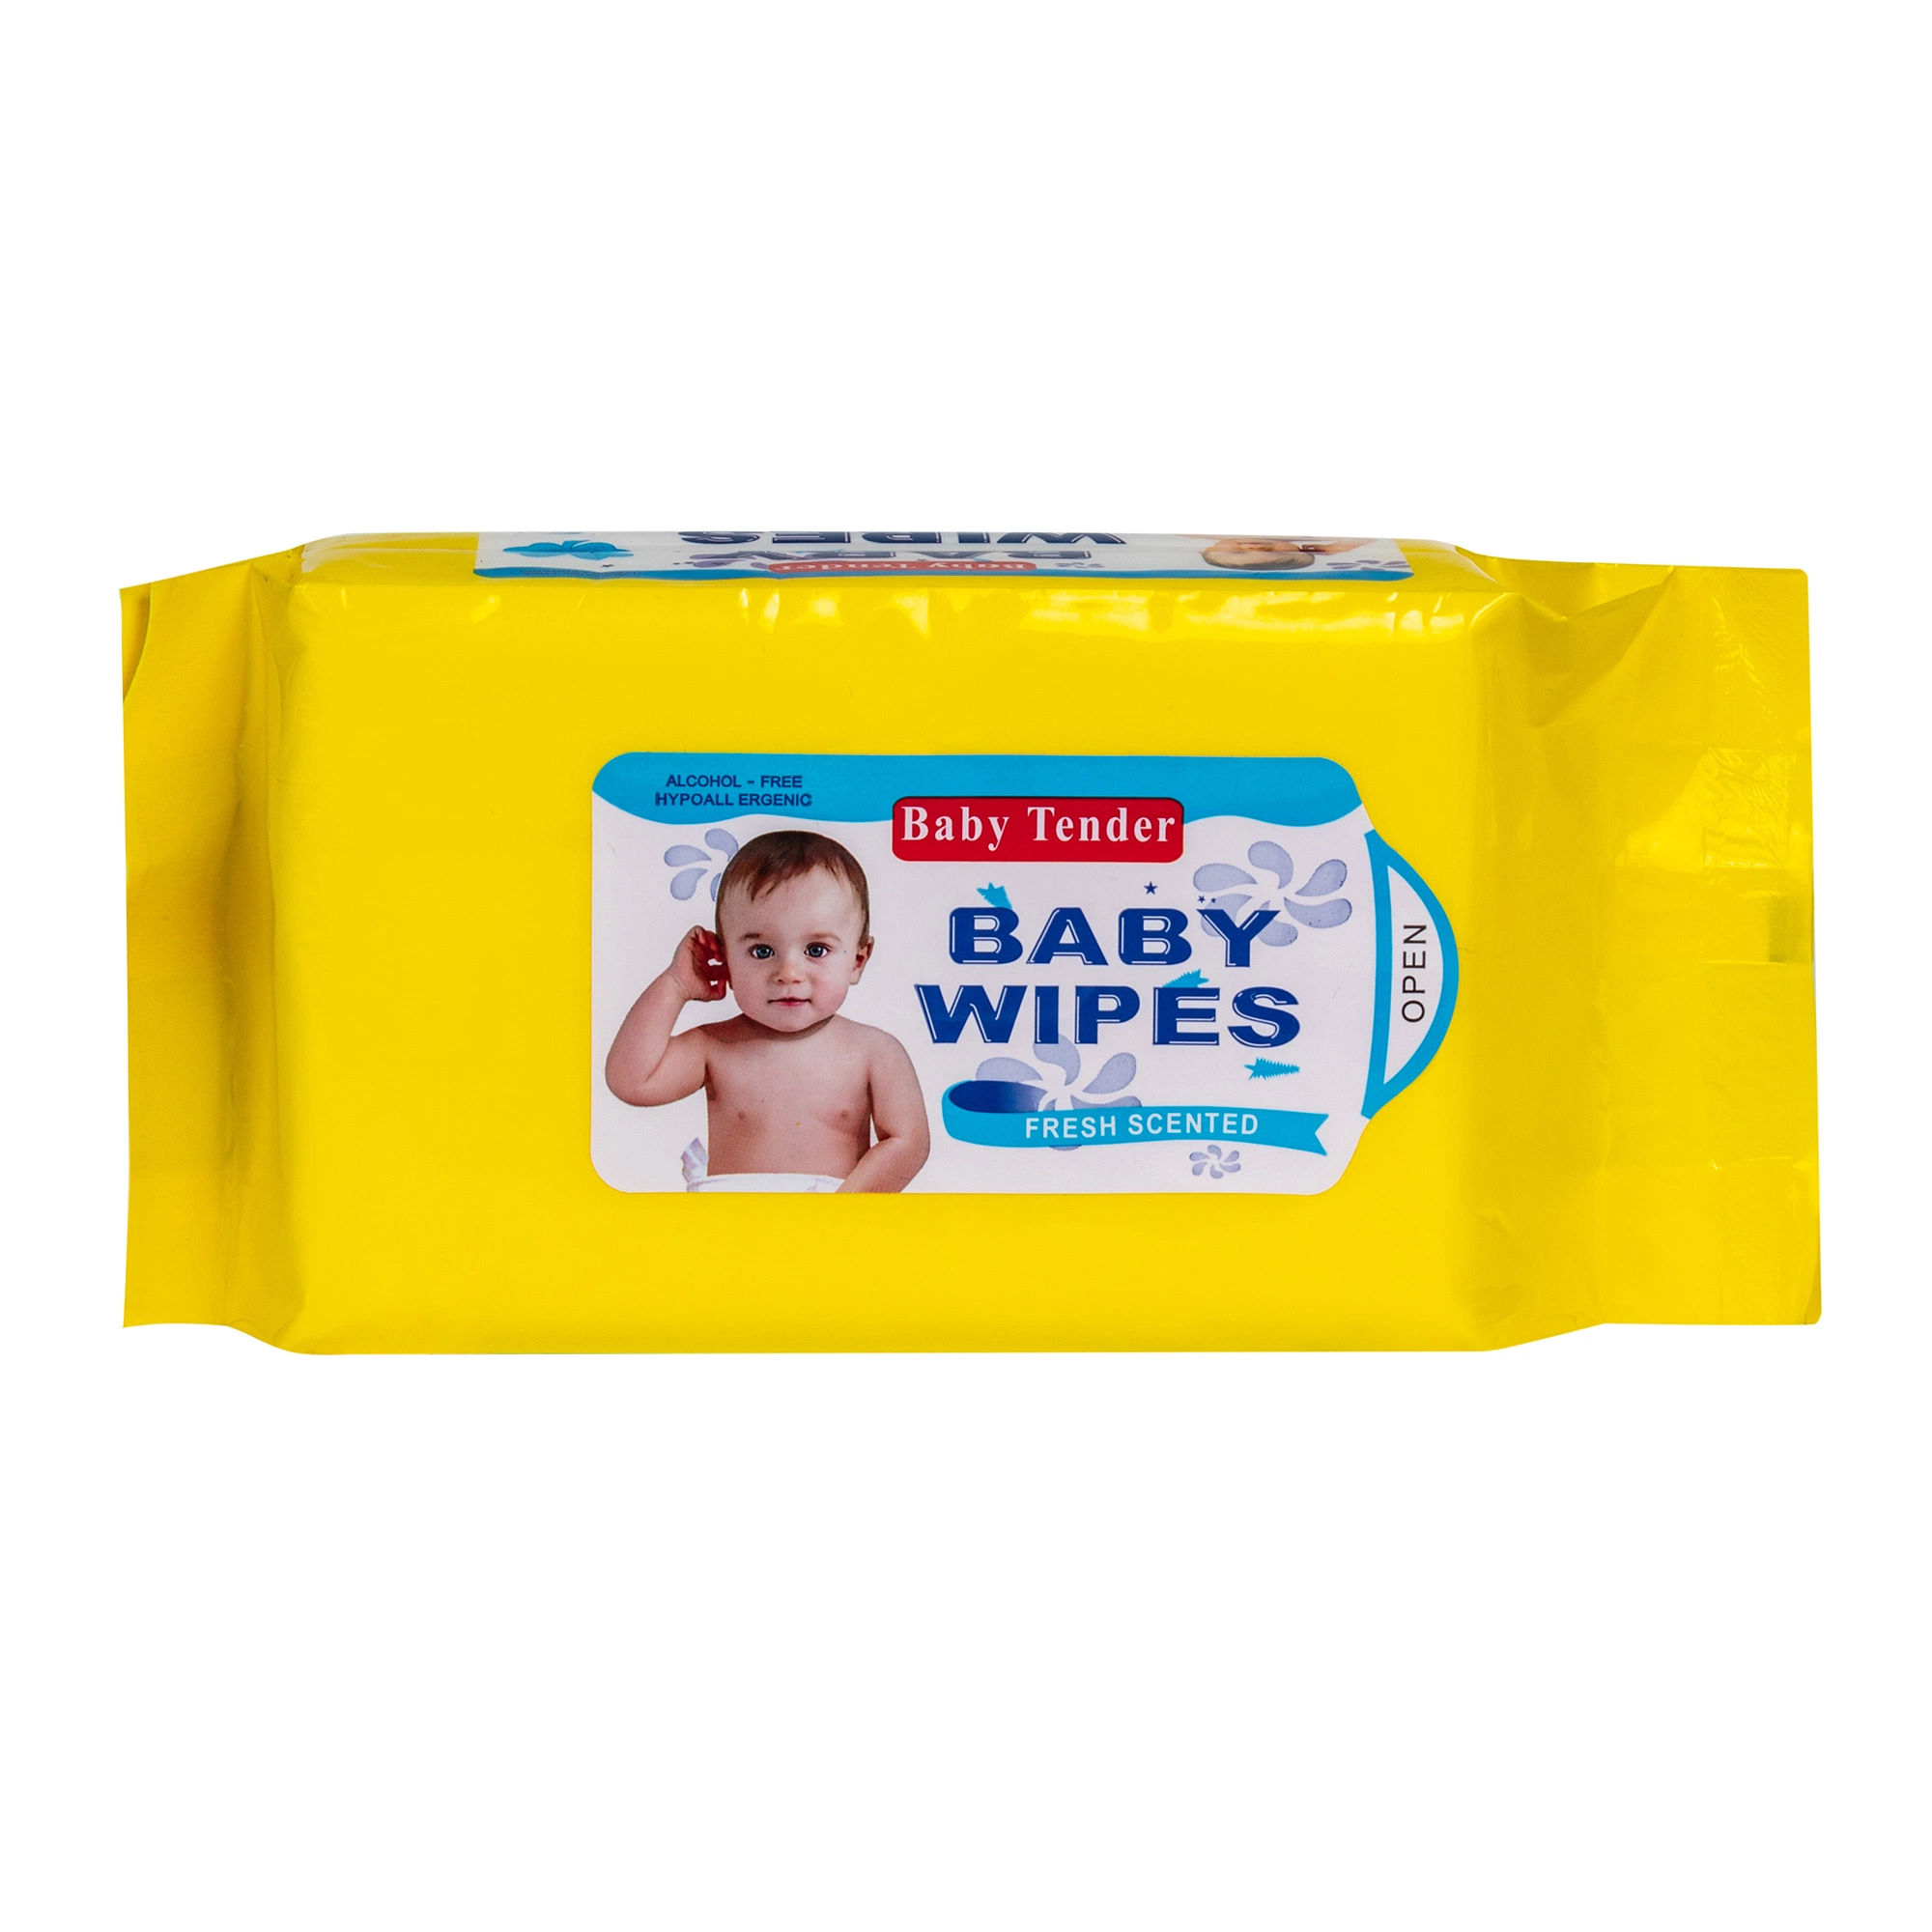 RO Water Organic Baby Wipes Non-Woven Fabric Unscented Natural Wet Baby Wipes for Baby Skin Care